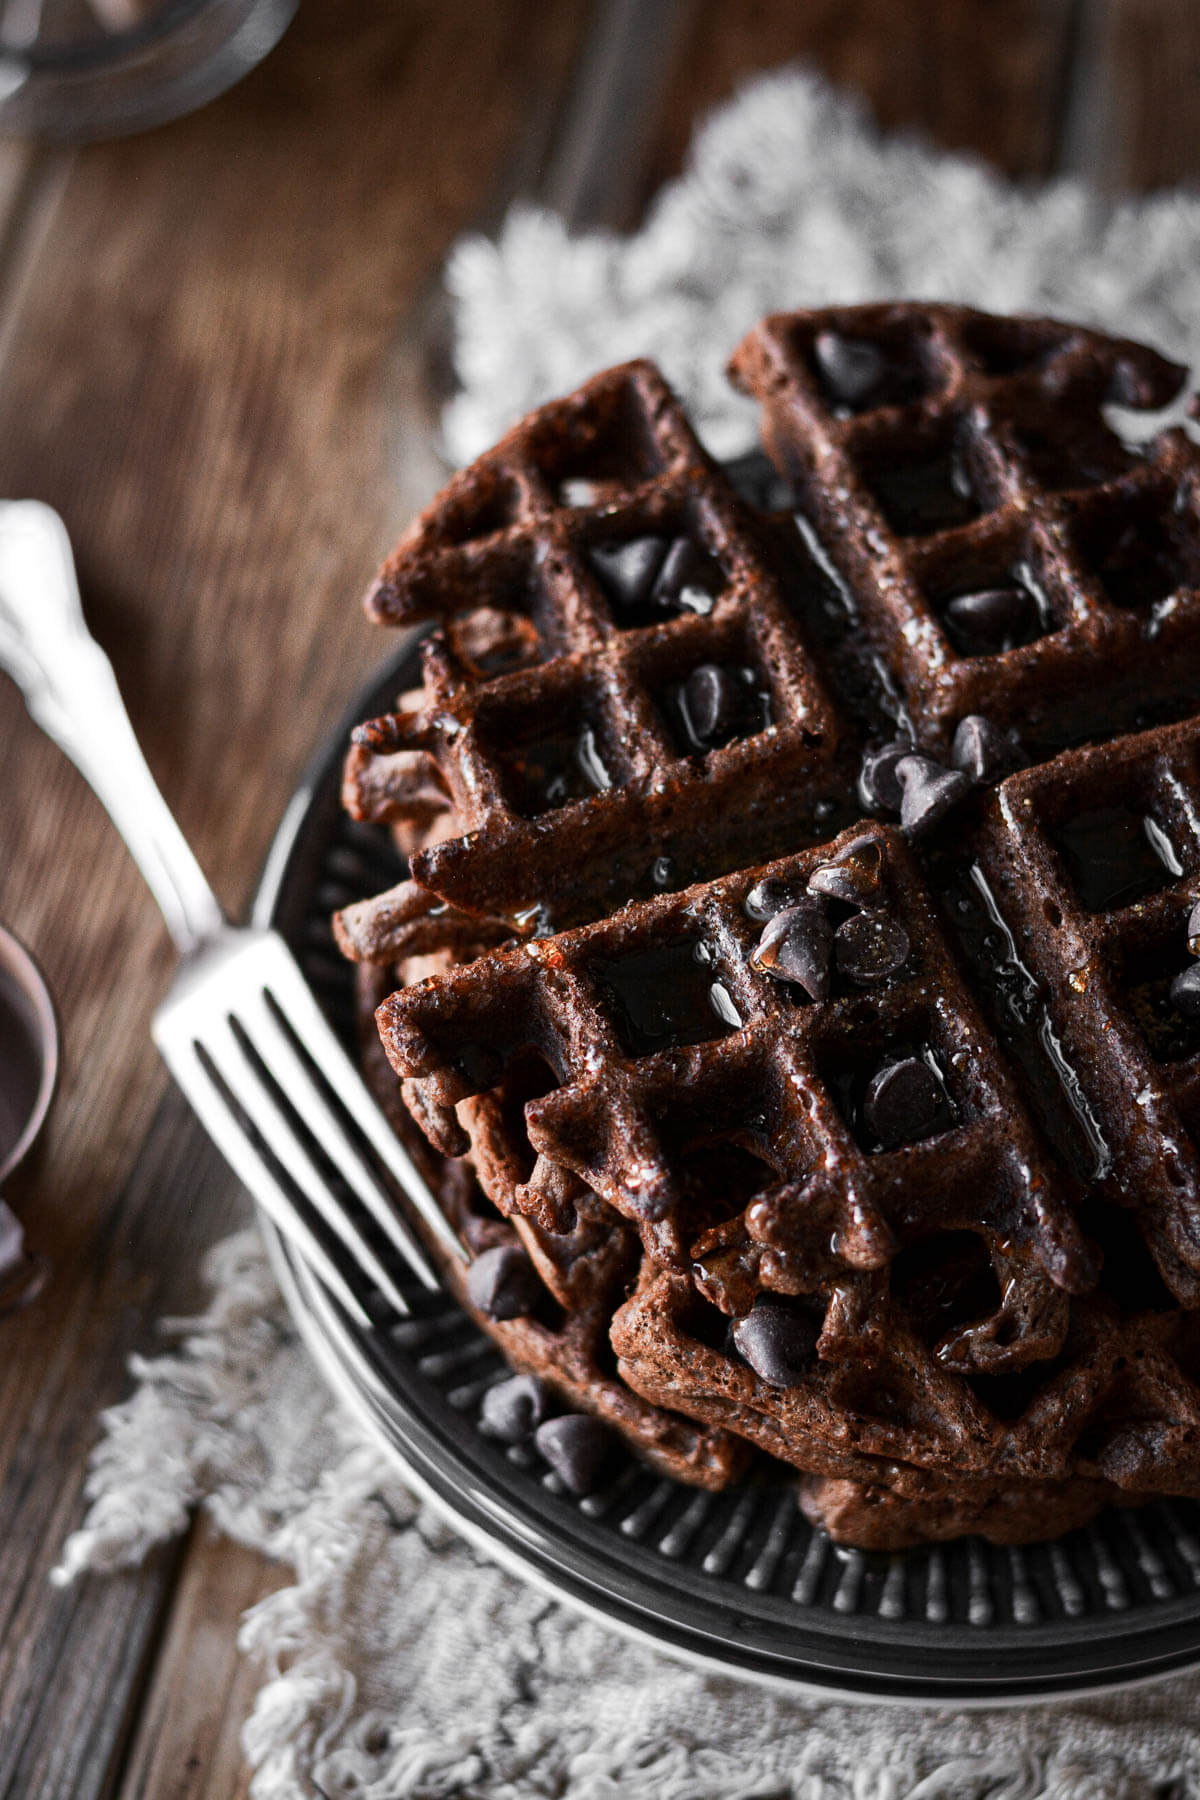 Chocolate waffles with syrup and chocolate chips.